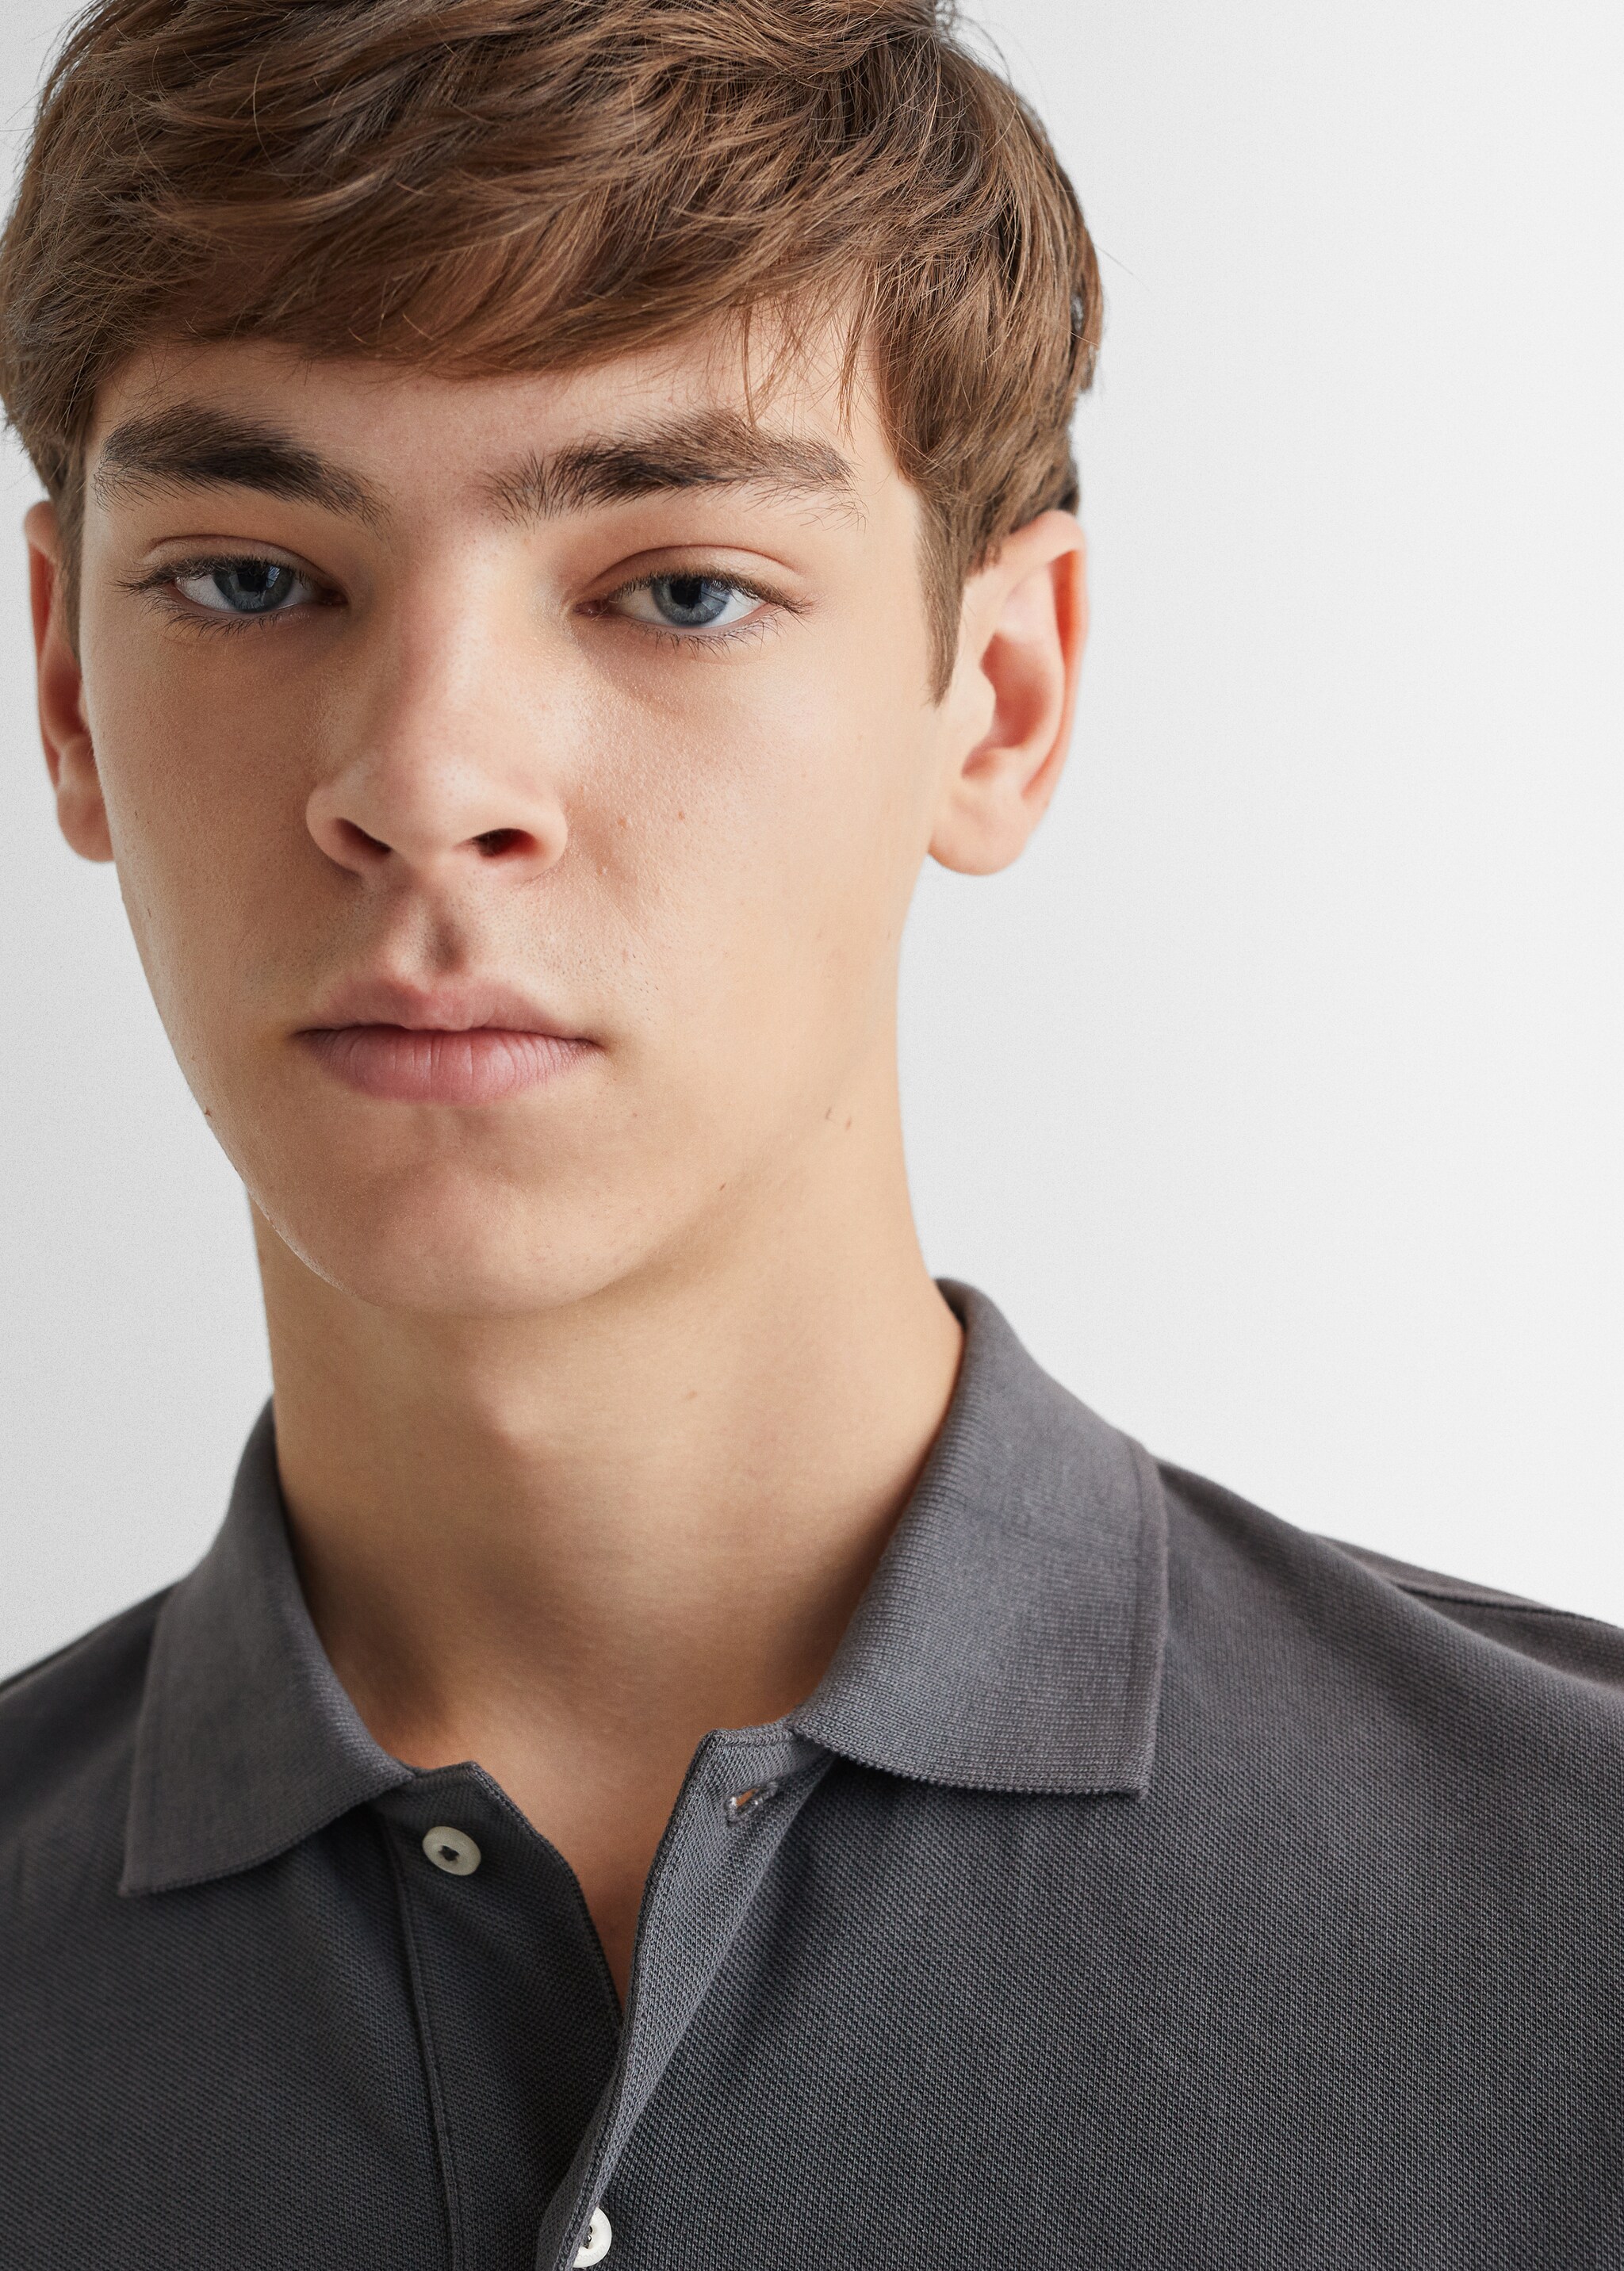 100% cotton polo shirt - Details of the article 1